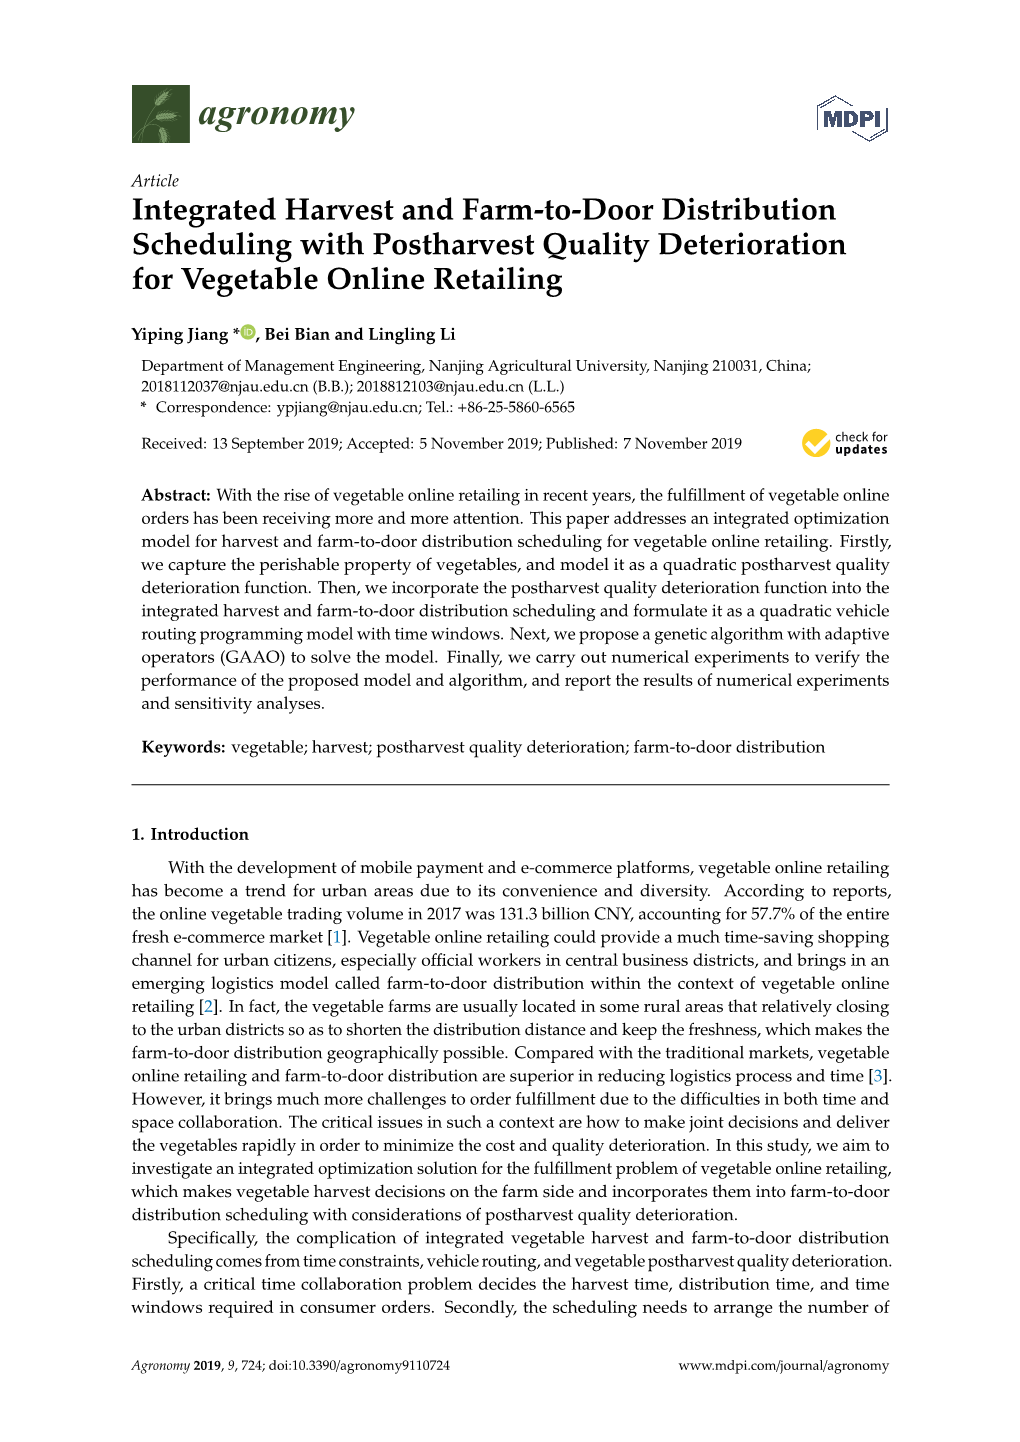 Integrated Harvest and Farm-To-Door Distribution Scheduling with Postharvest Quality Deterioration for Vegetable Online Retailing